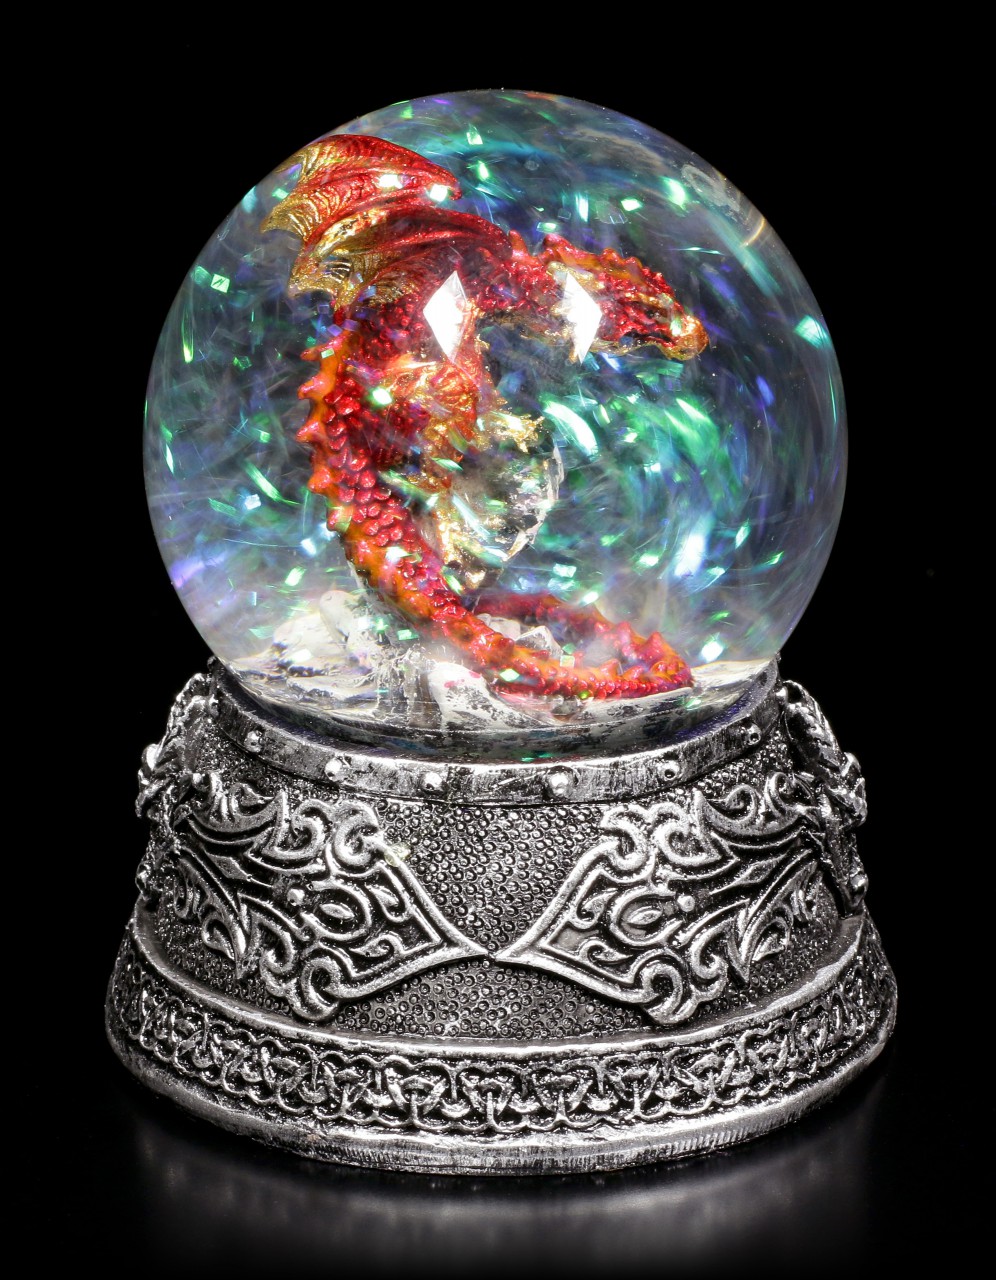 Snow Globe with Dragon - Enchanted Ruby